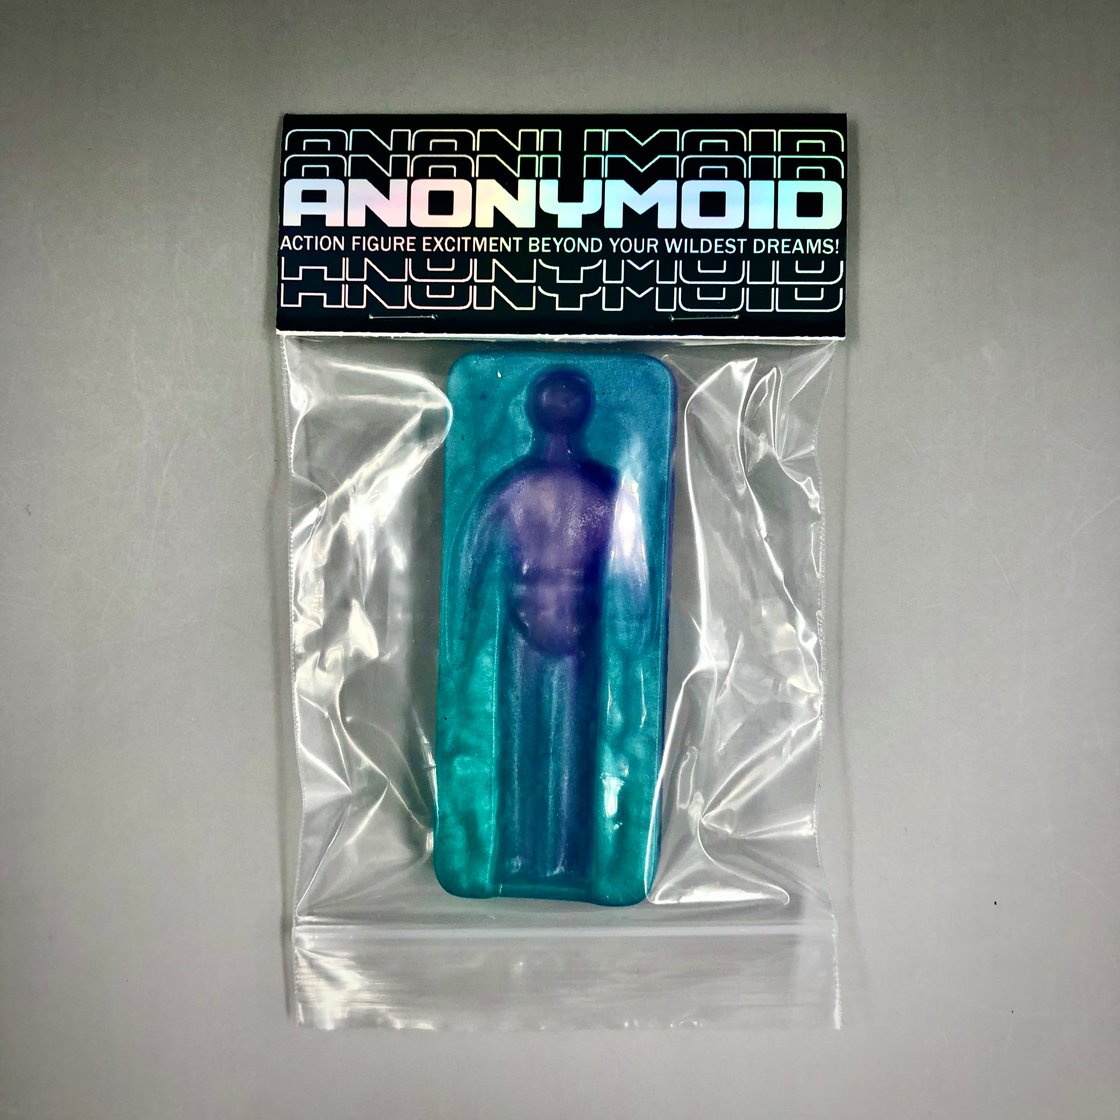 Image of Anomynoid - Random Color